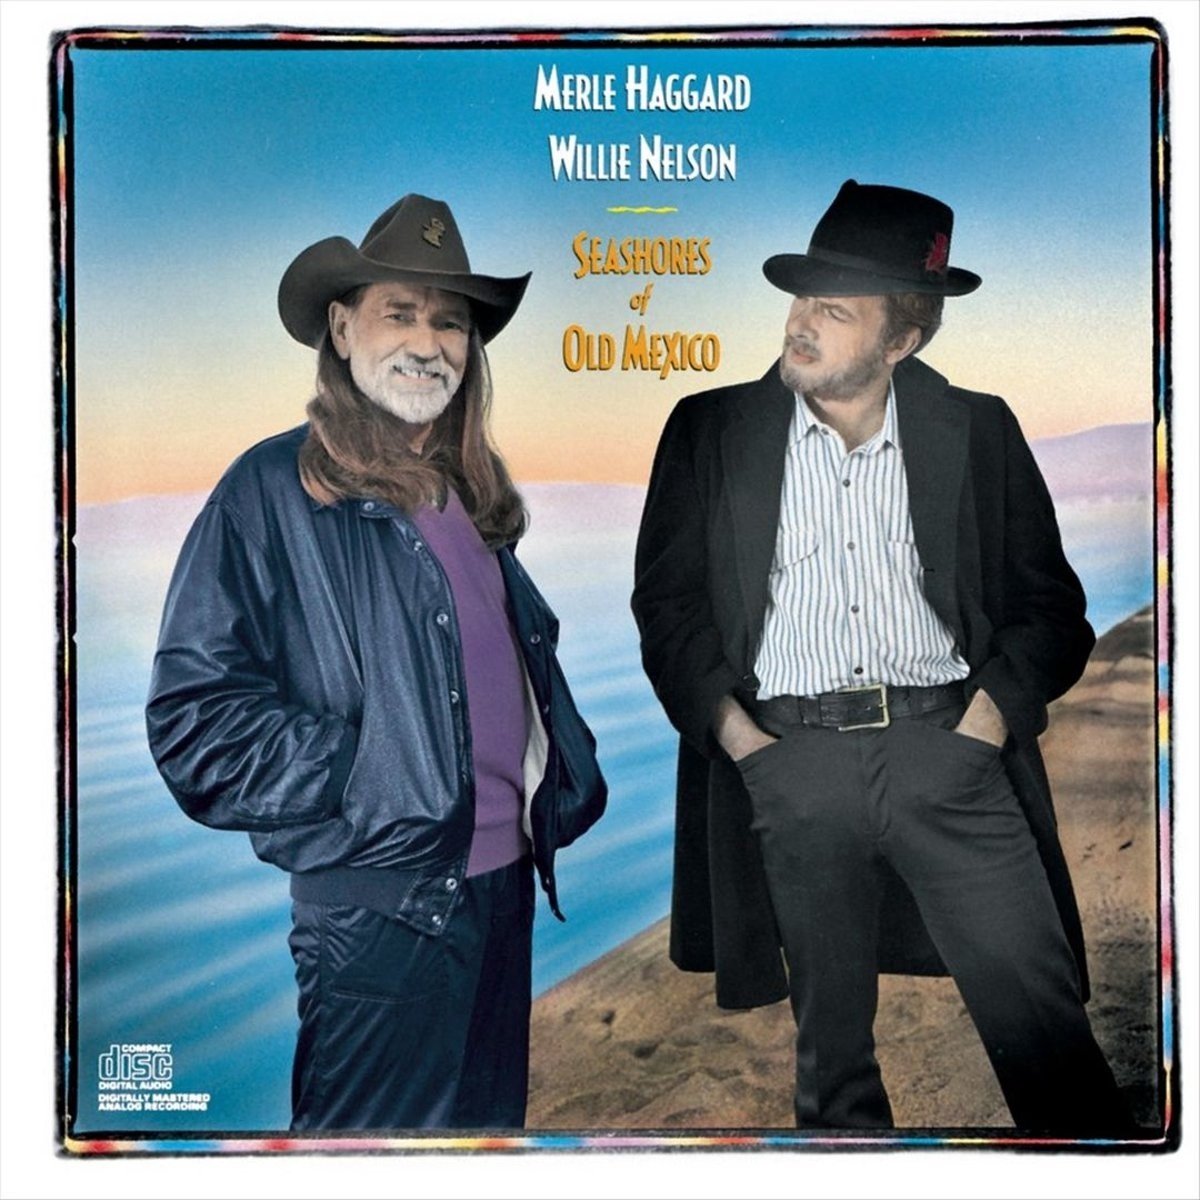 Merle Haggard & Willie Nelson - Seashores Of Old Mexico (CD) - Merle Haggard & Willie Nelson